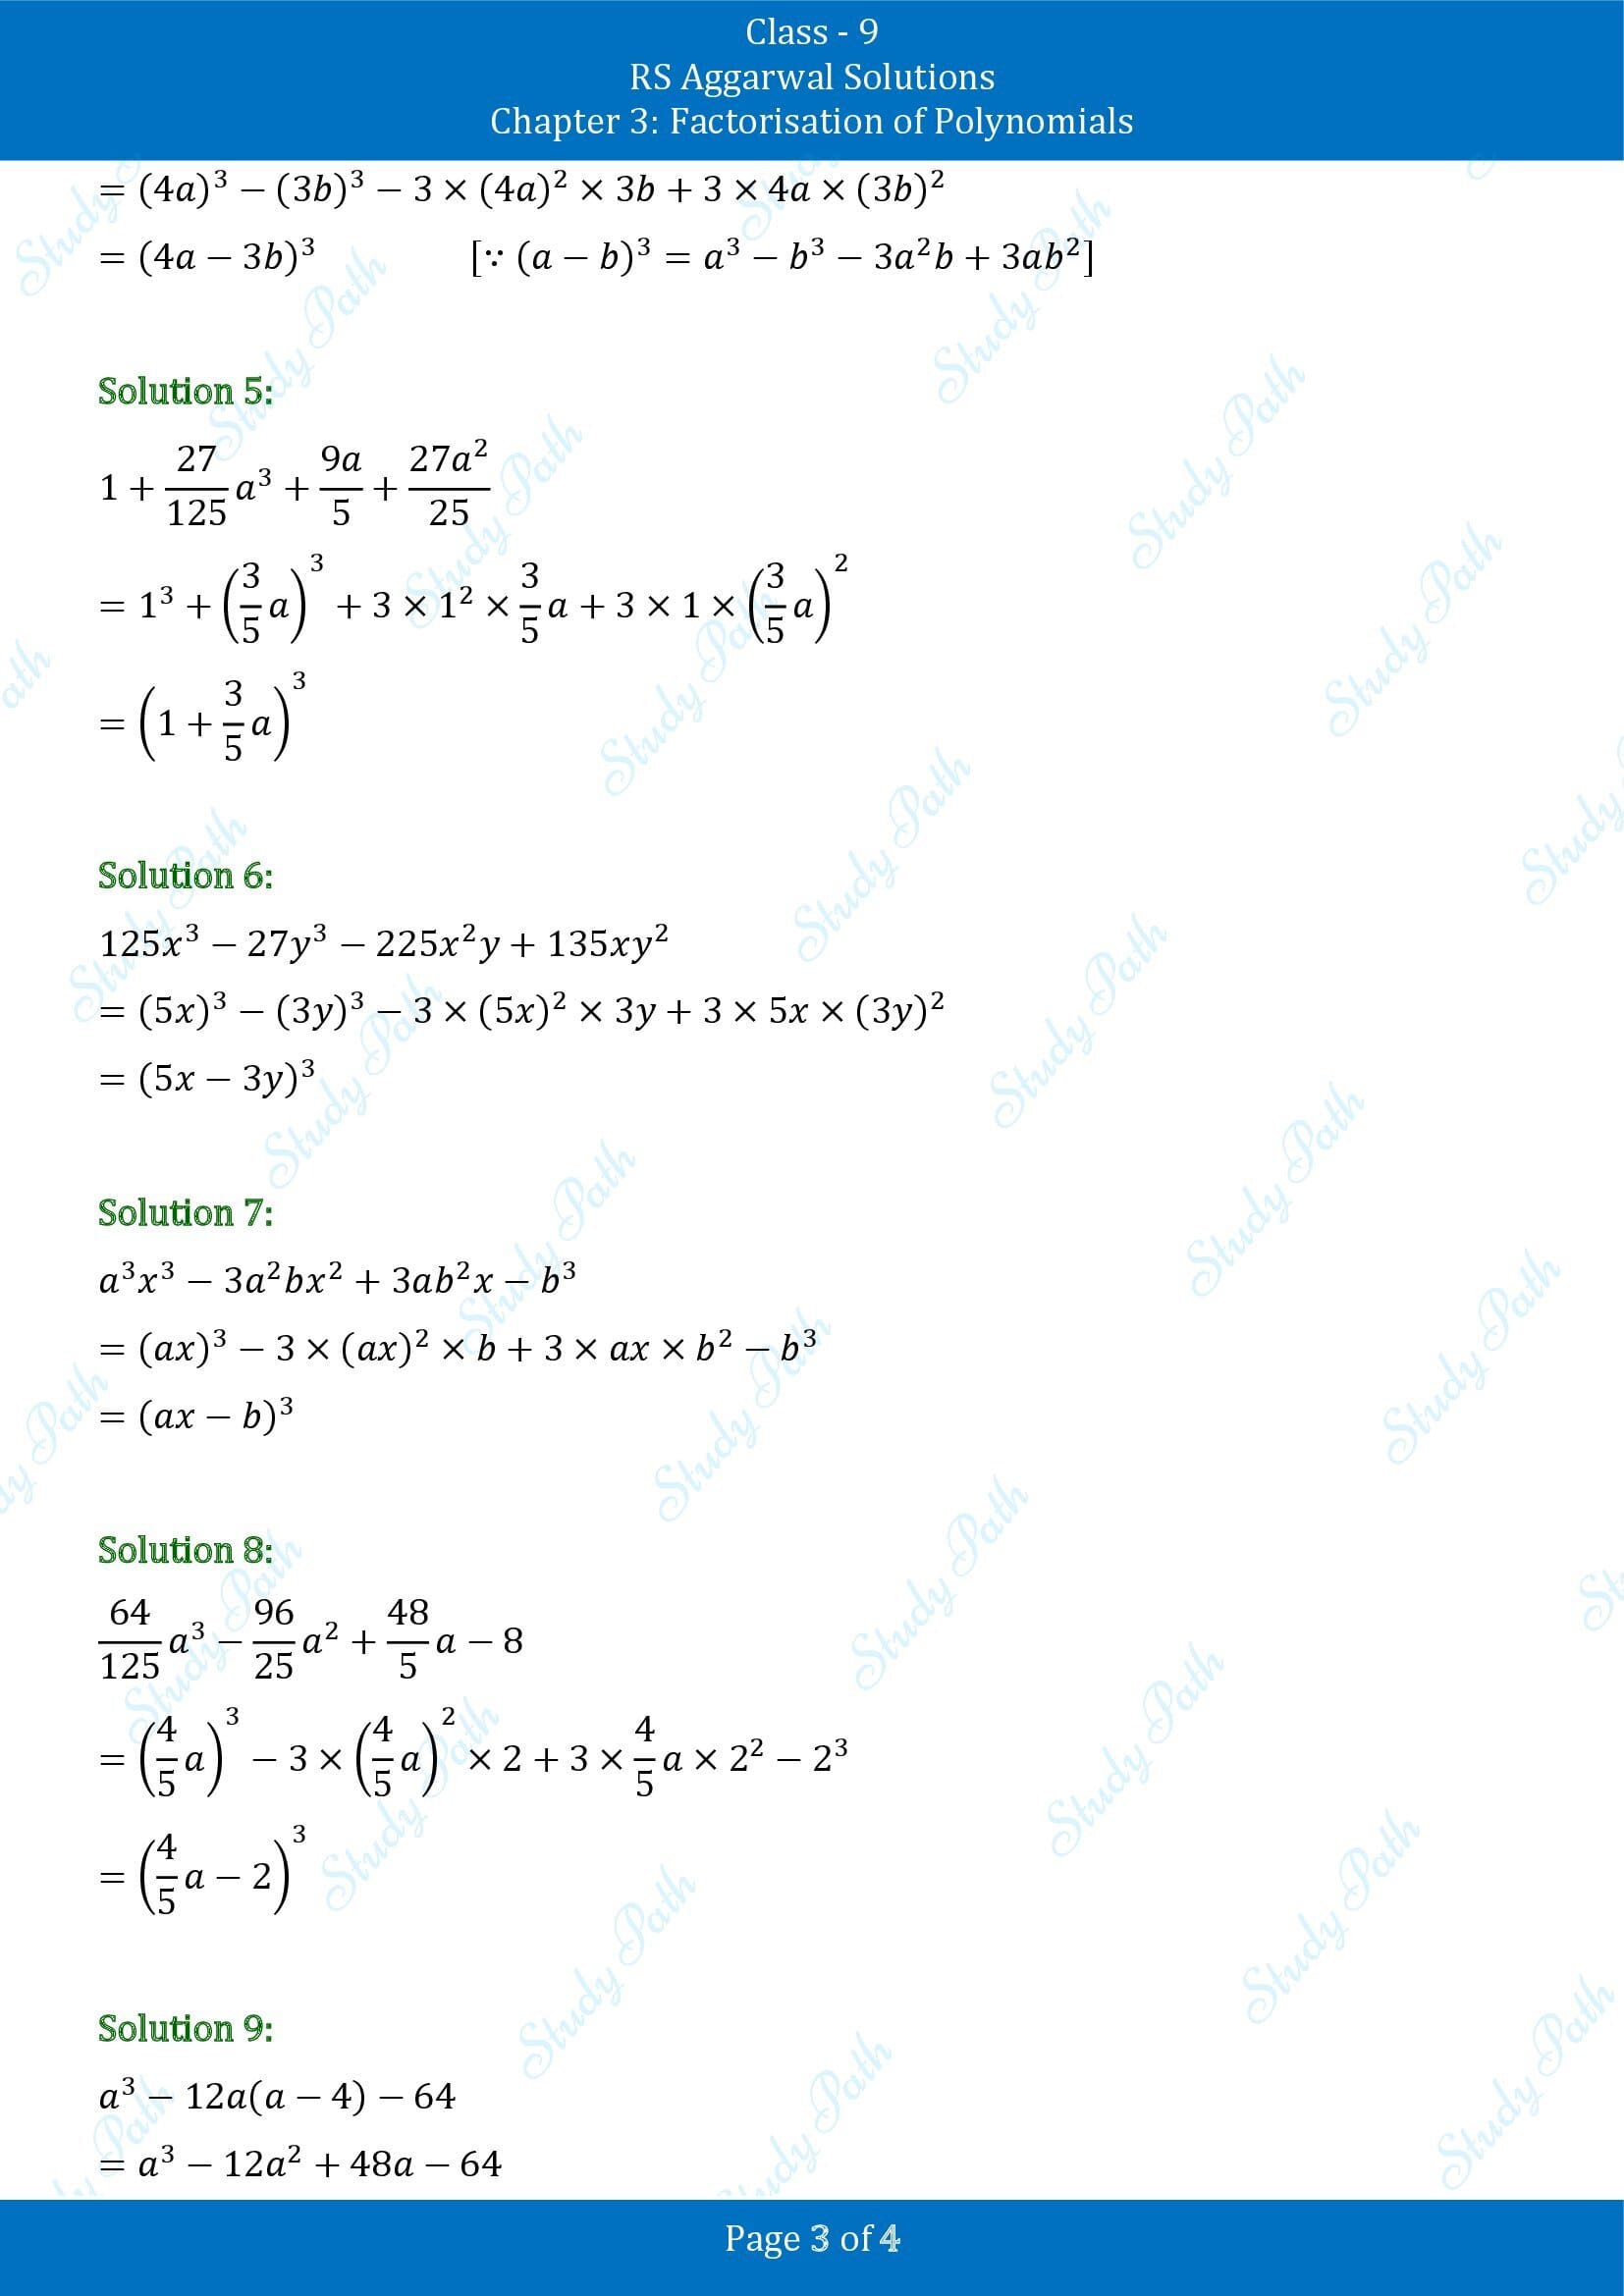 RS Aggarwal Solutions Class 9 Chapter 3 Factorisation of Polynomials Exercise 3E 00003